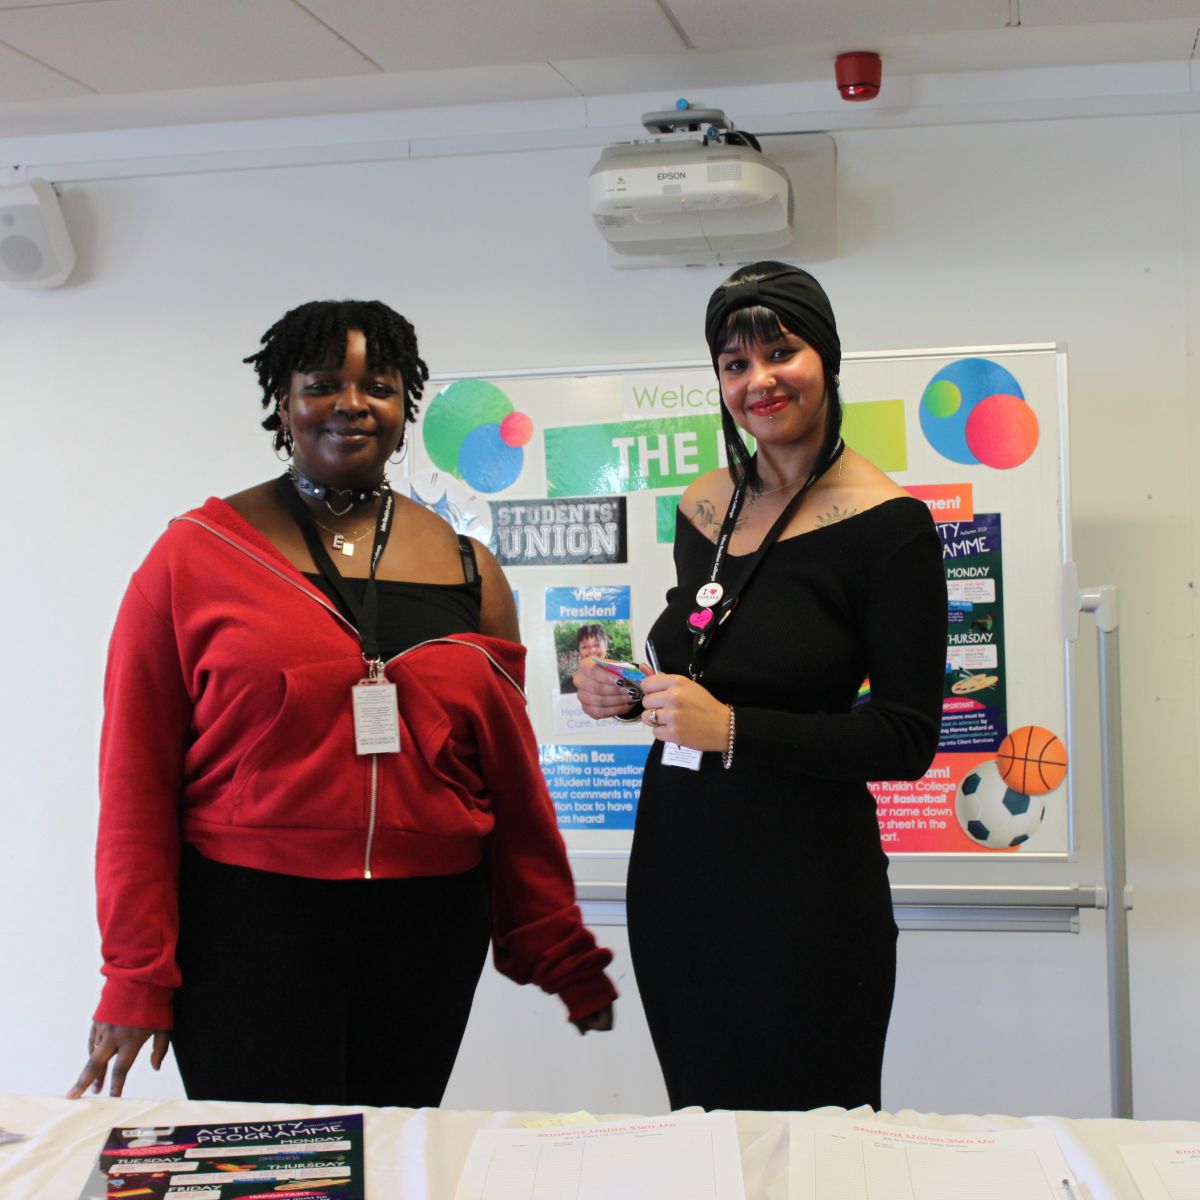 Members of the Student Union at the Freshers' Fair